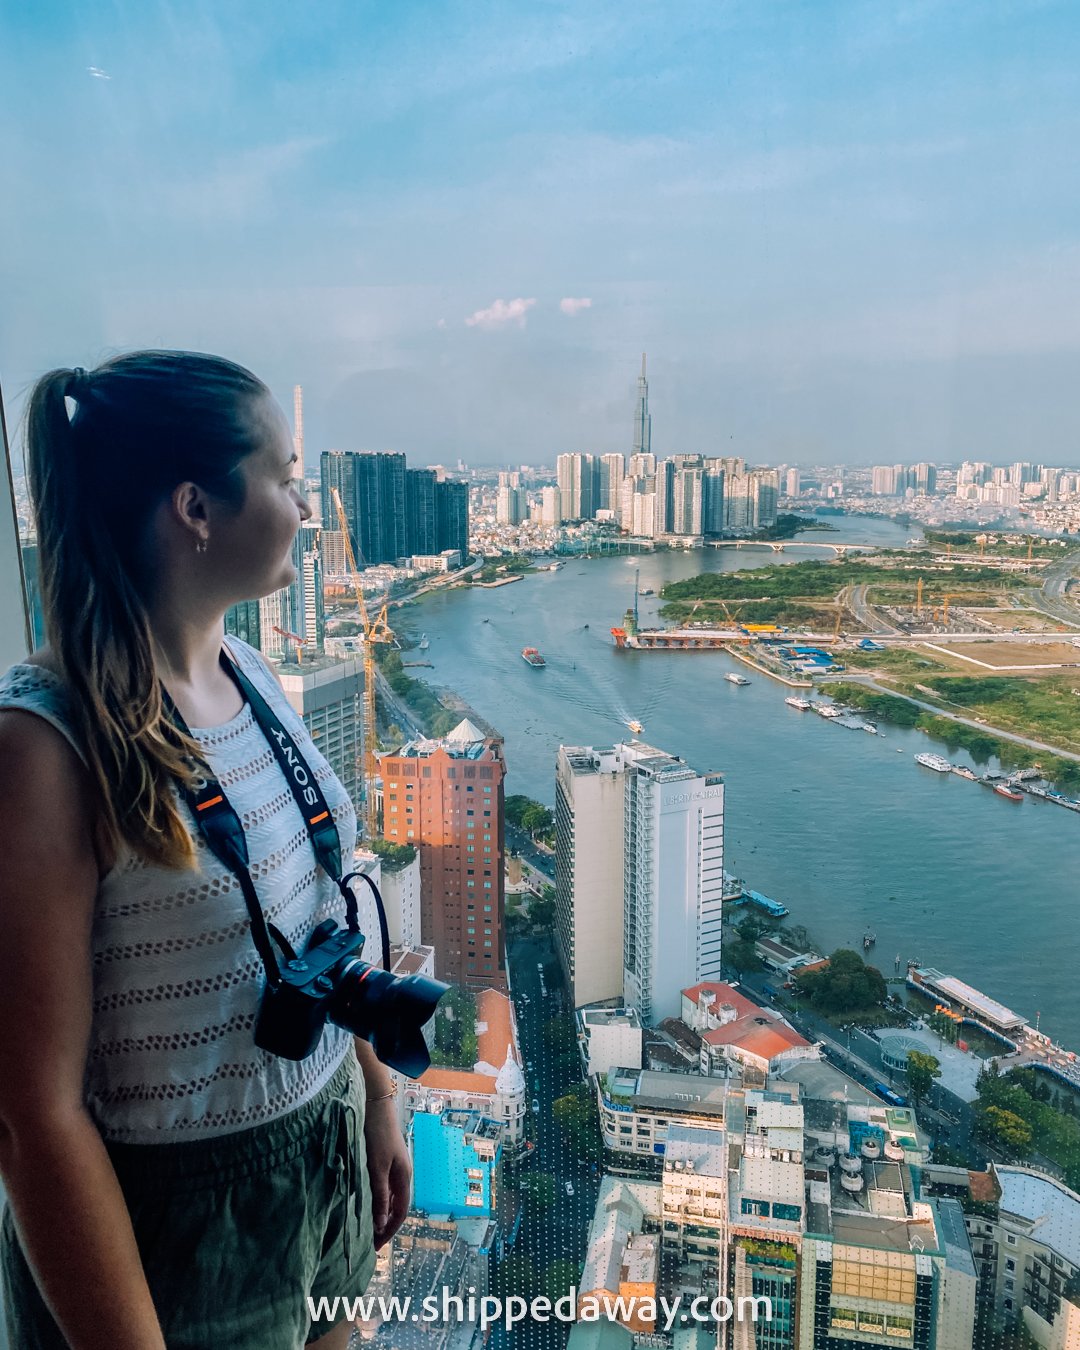 Arijana Tkalcec looking out from the Saigon Skydeck in Ho Chi Minh City, Vietnam